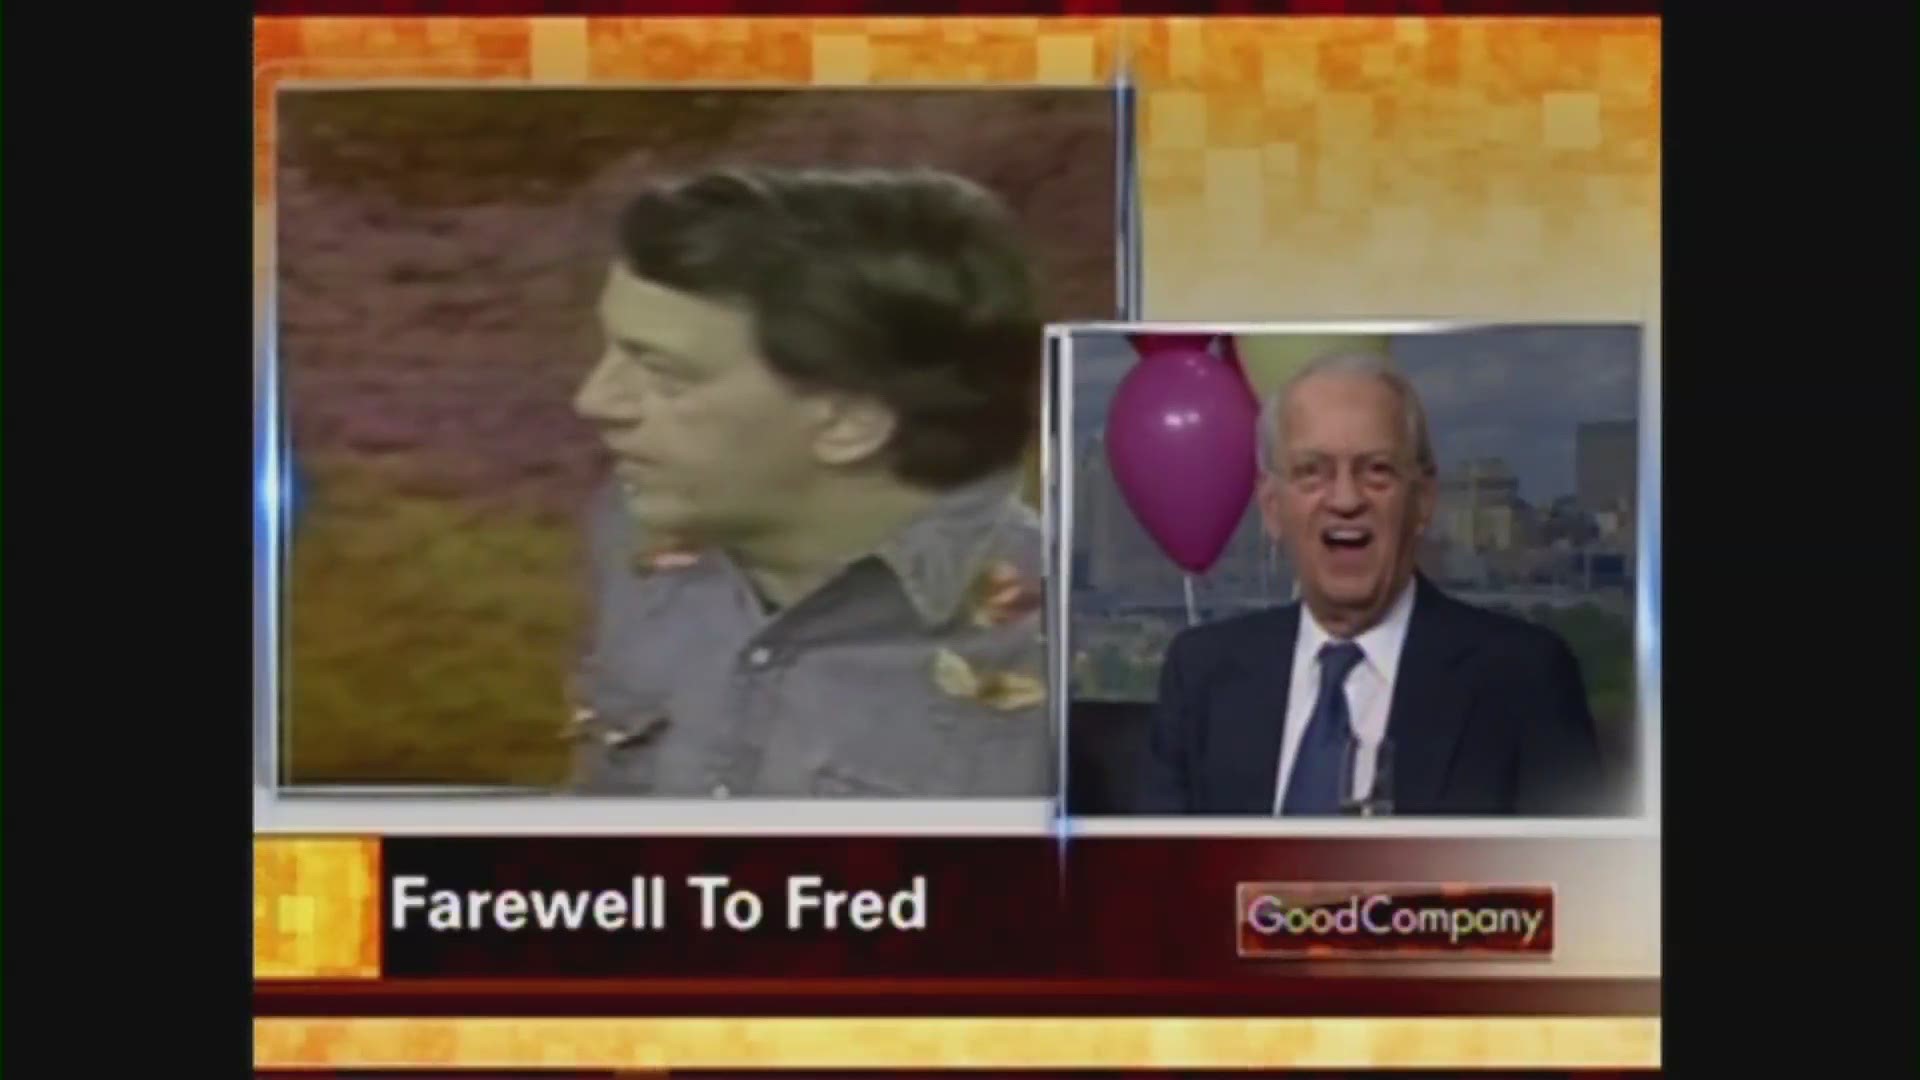 July 19, 2019: Cleveland TV icon Fred Griffith has passed away at the age of 90. Here's a look back at his legendary career here in Cleveland, which we aired the day he retired from WKYC in February 2012.